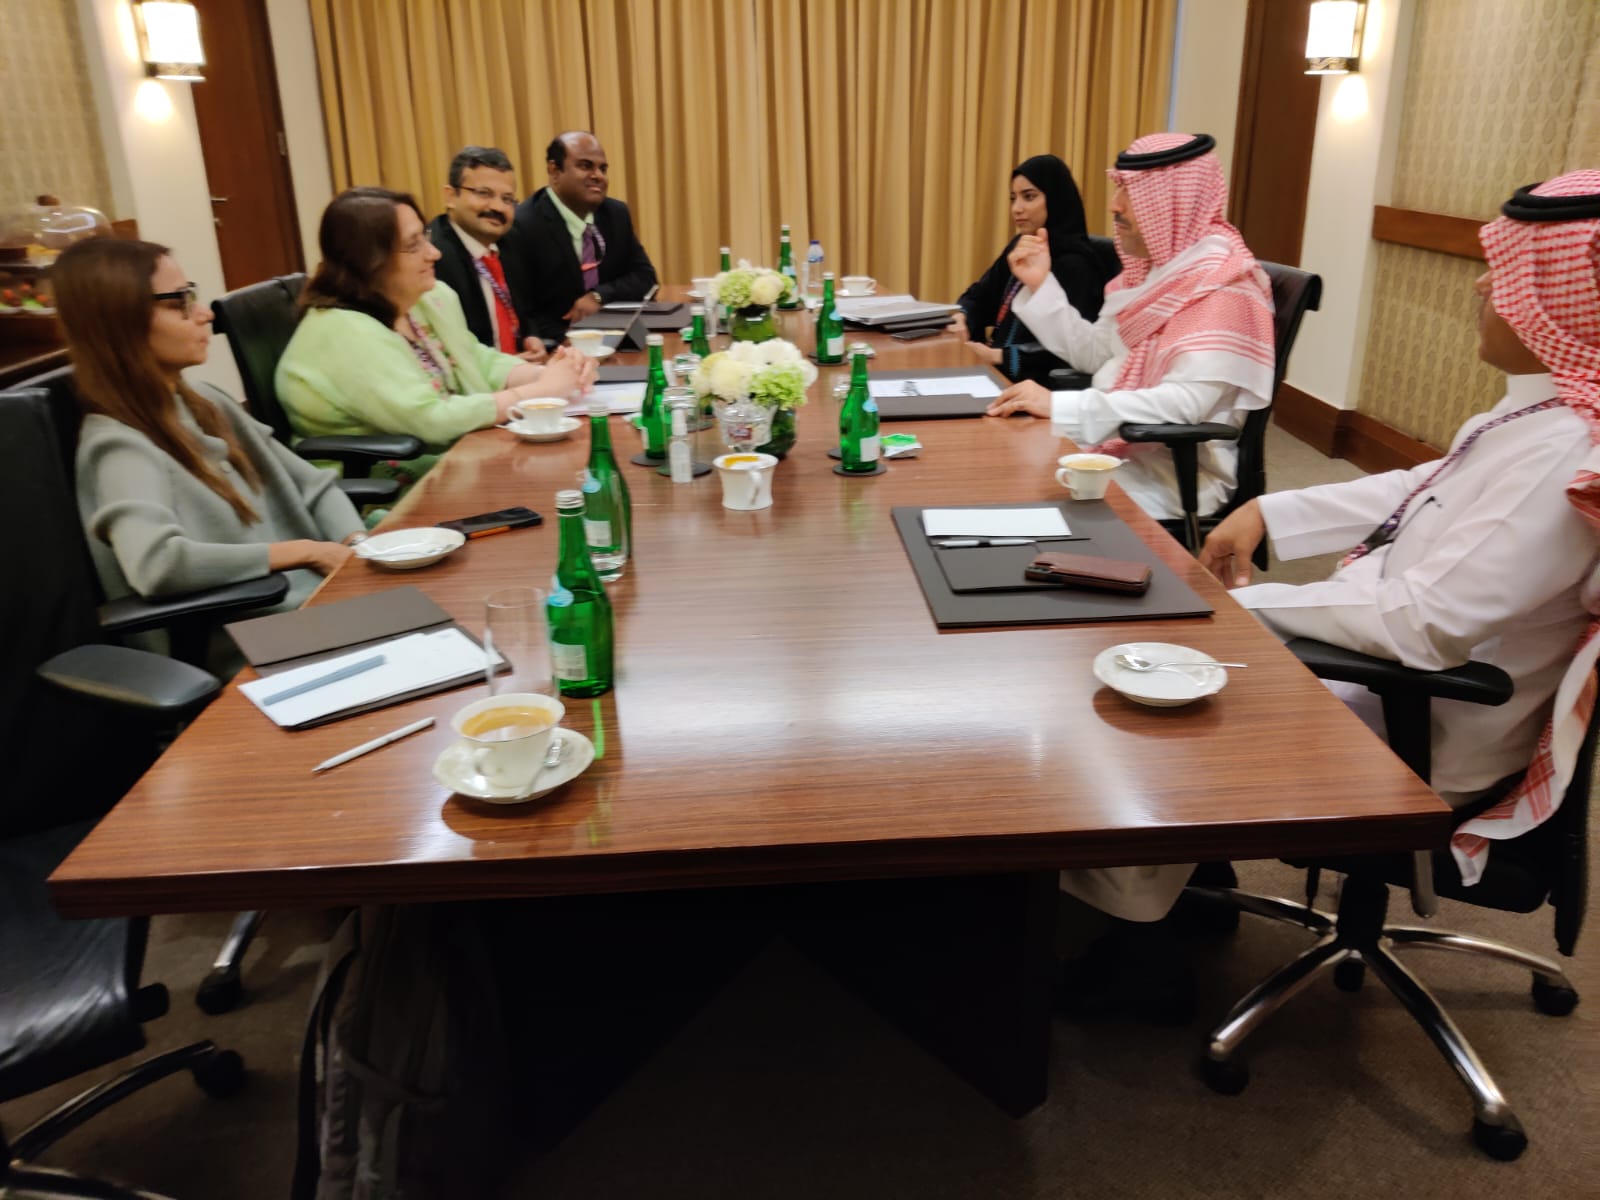 Bilateral meeting held between Ms. Parveen Mehta, DAI(HR, IR & Coordination) and Dr. Hussam Al-Angari, President of the General Court of Audit of Saudi Arabia on 30th August, 2022 on the side-lines of the SAI20 Summit held on 29-30th August, 2022 in Bali, Indonesia